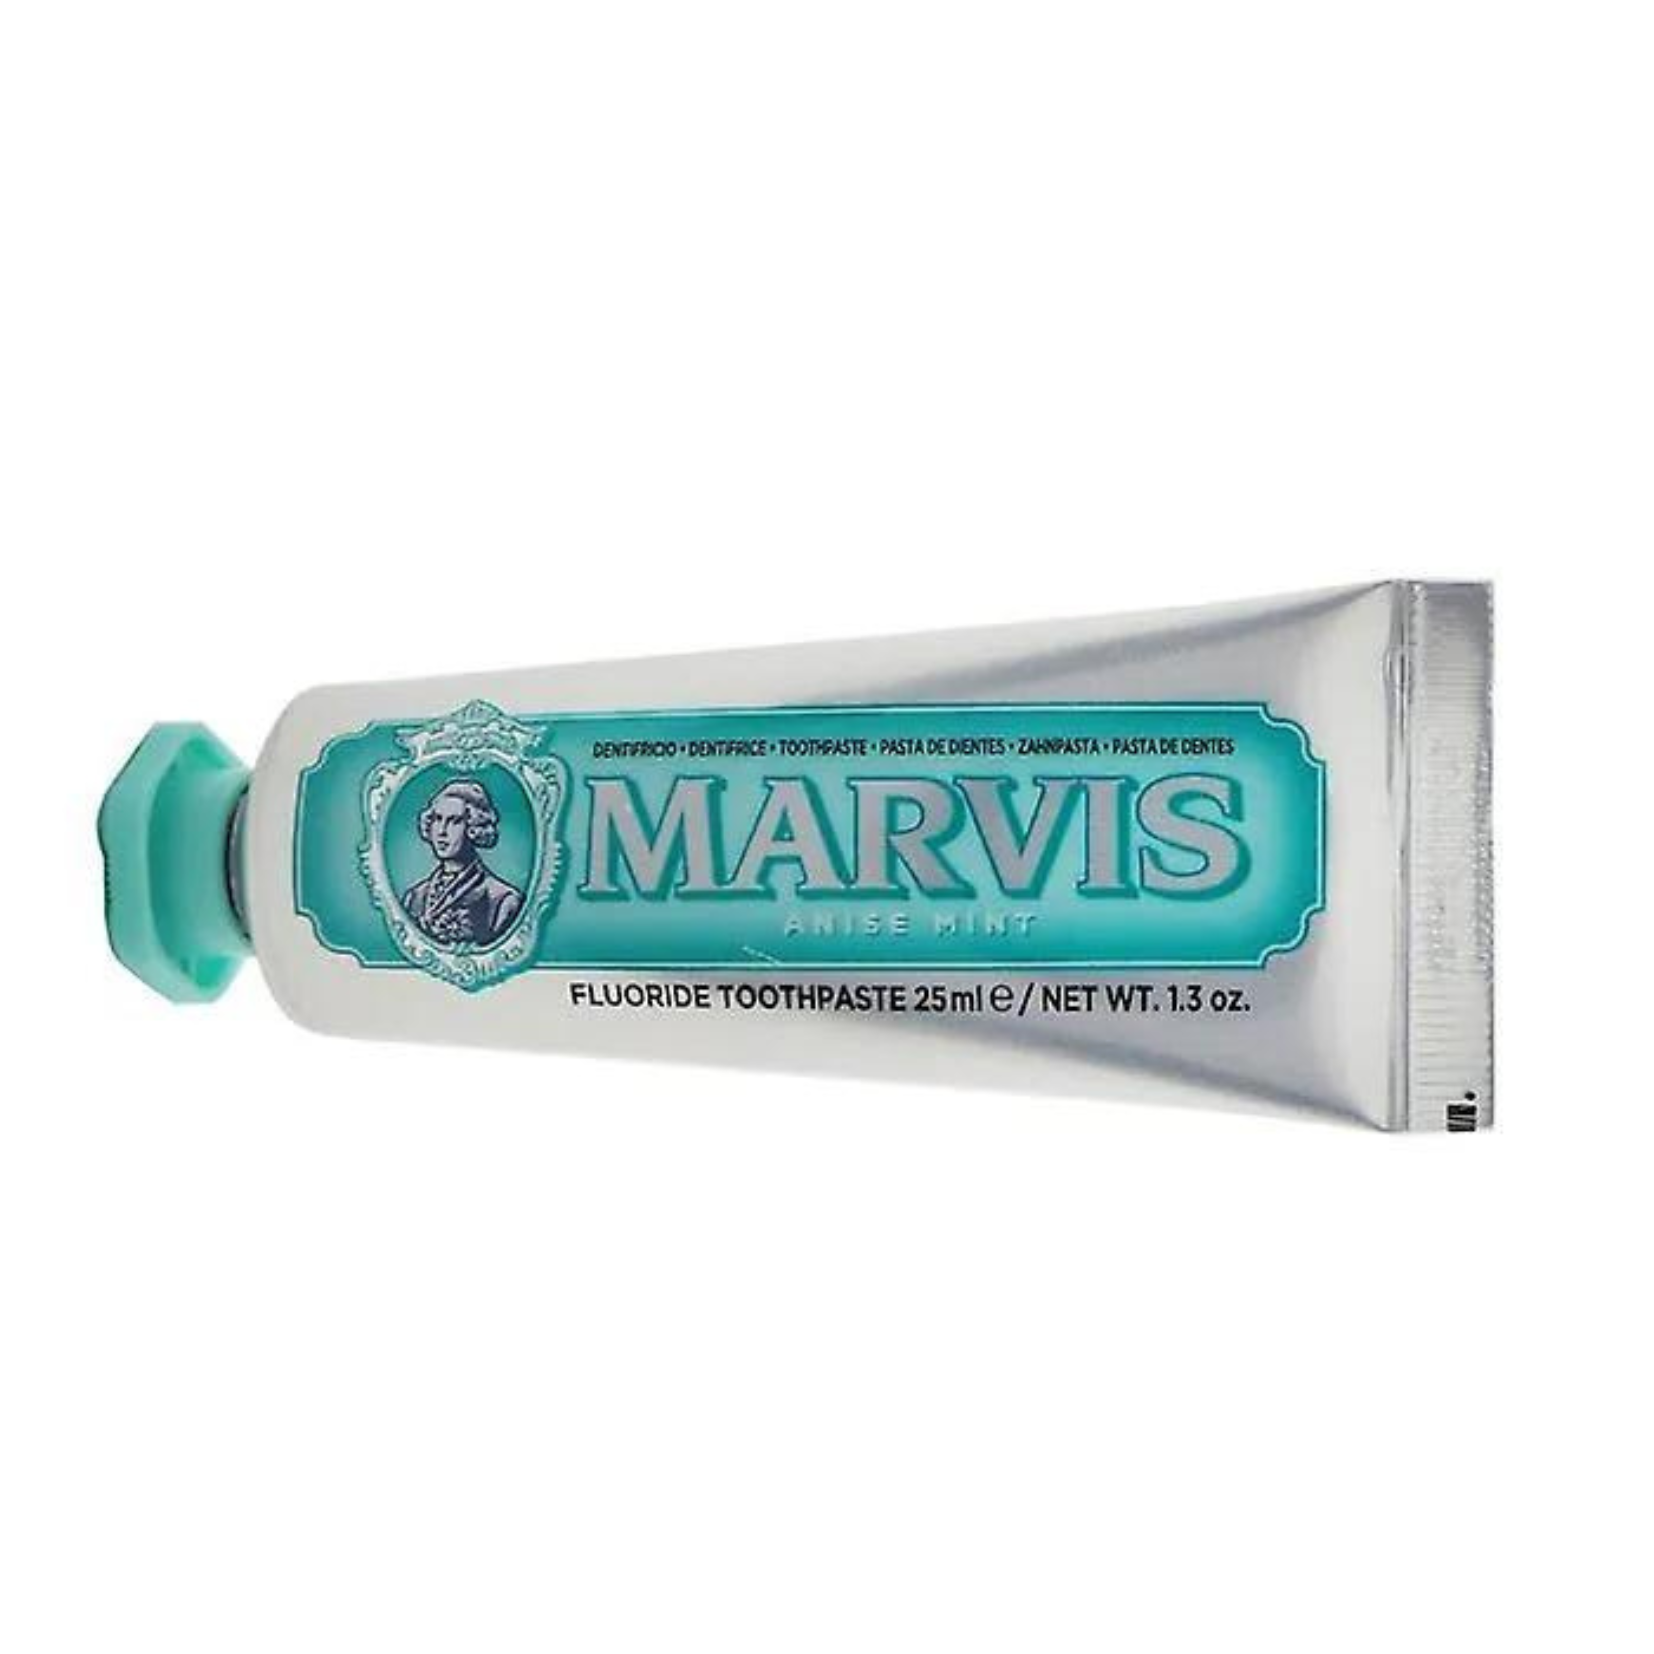 MARVIS - Dentifrice - Anis Menthe